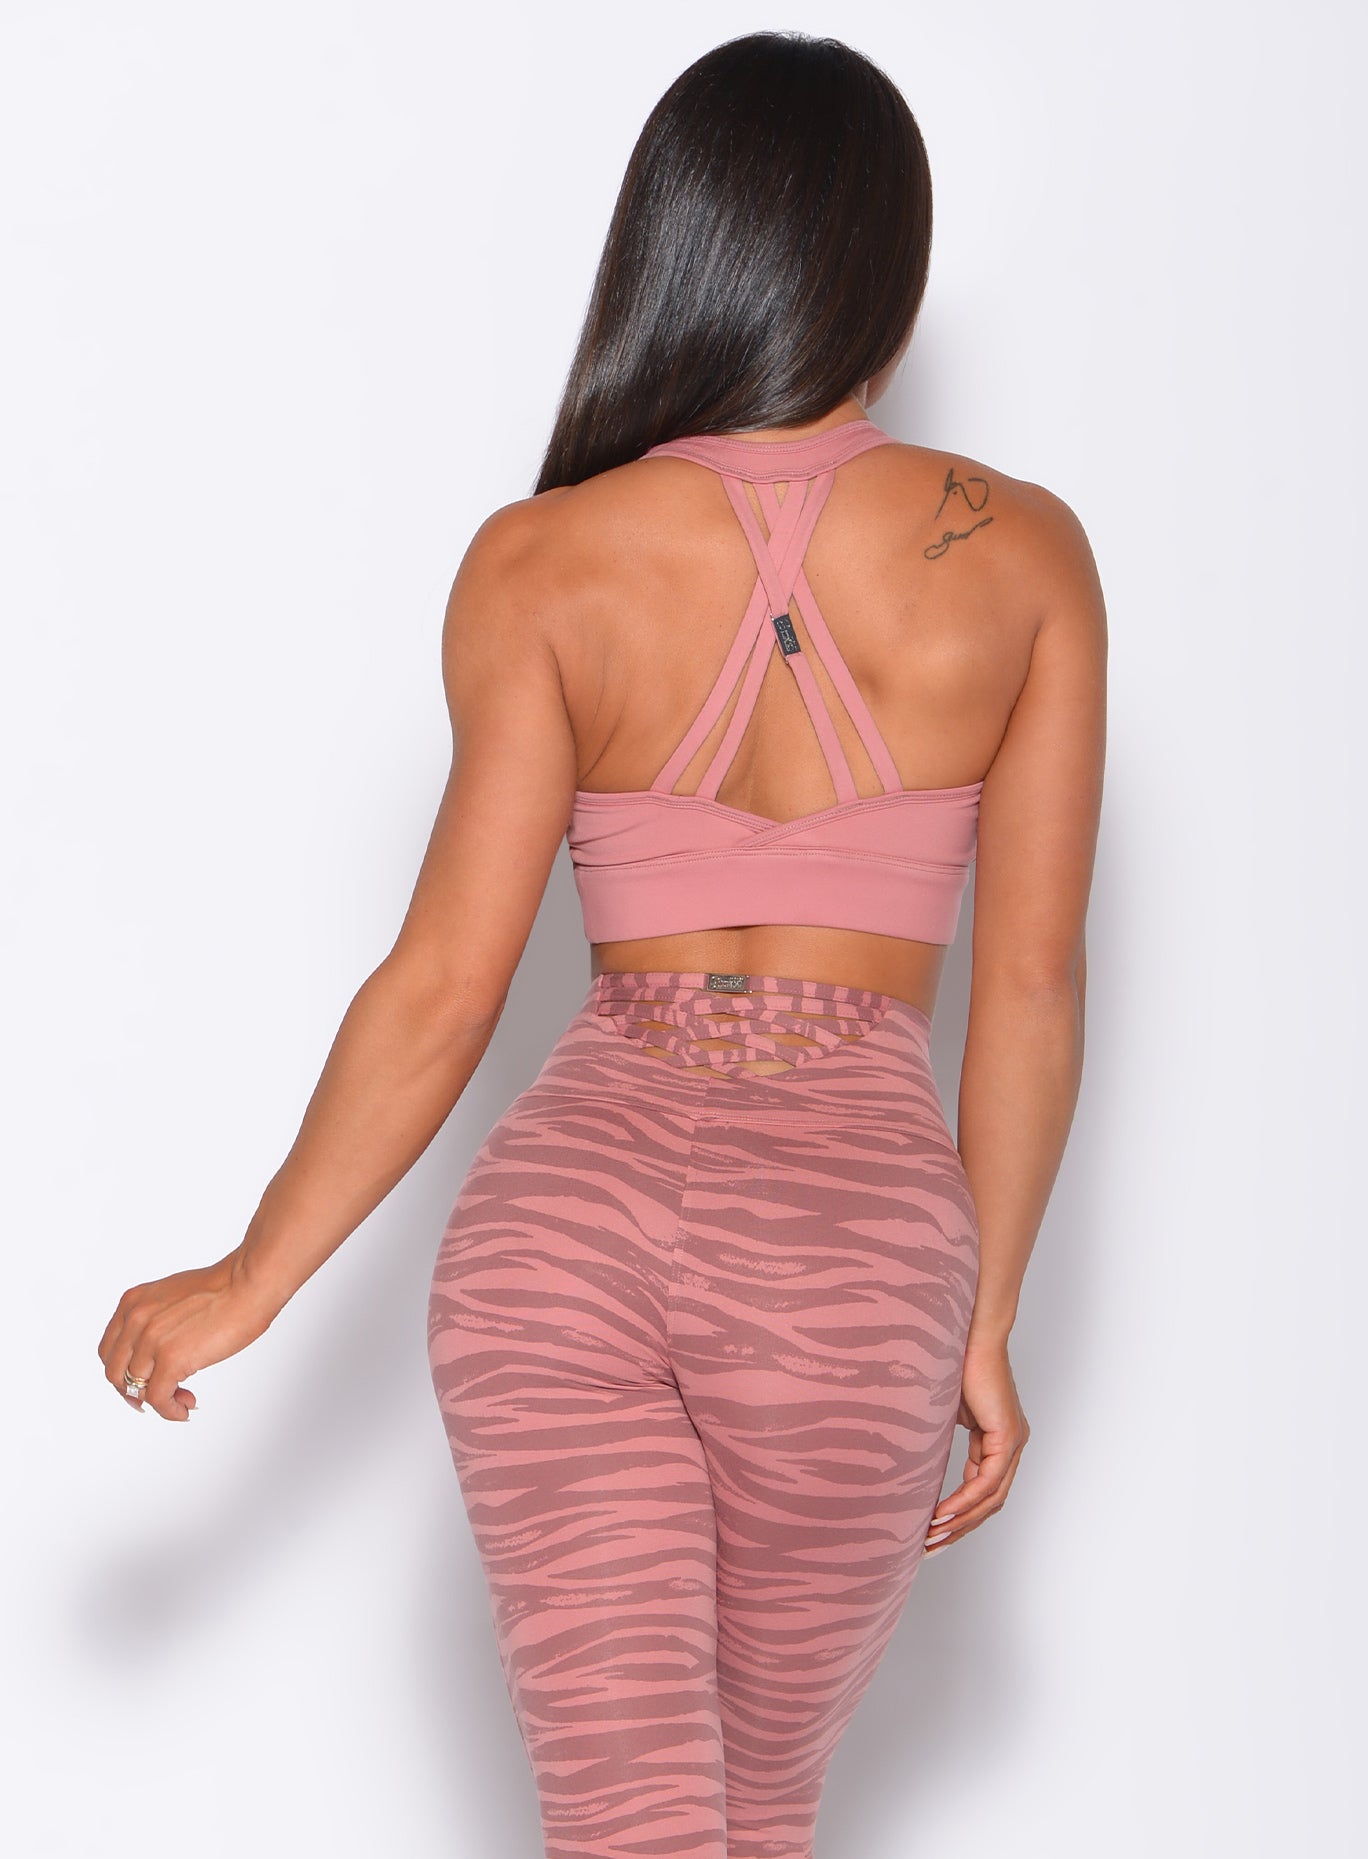 Back profile view of a model in our rival sports bra in solid blush color and a matching tiger print leggings